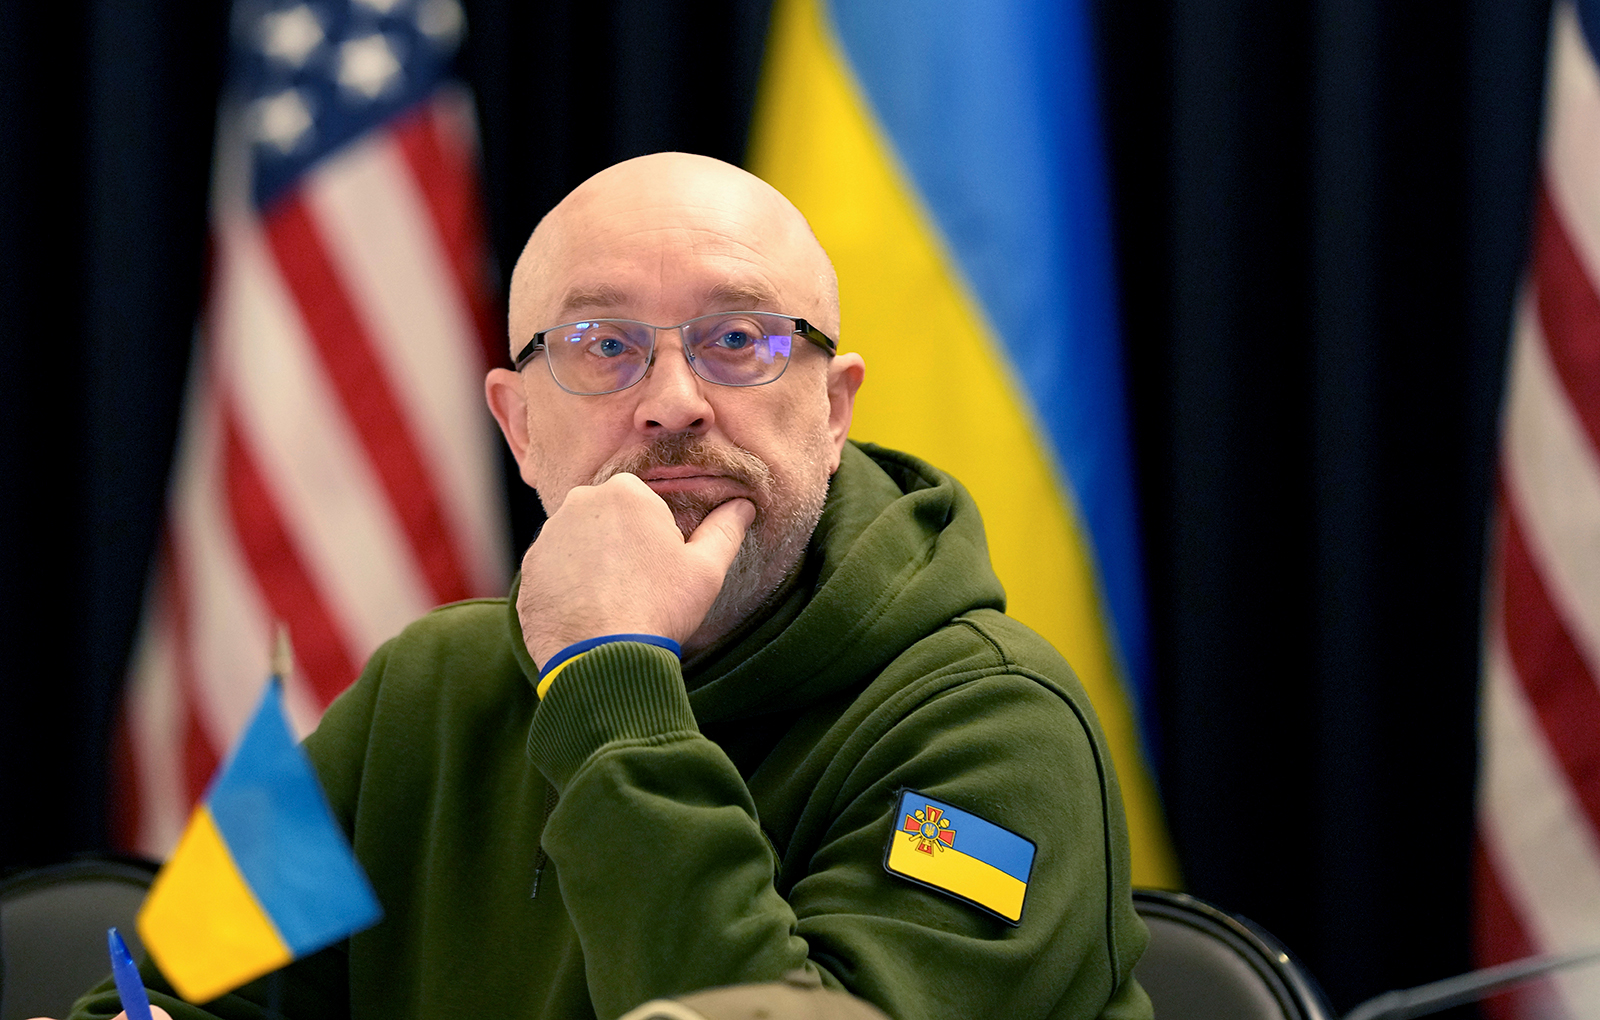 Oleksii Reznikov attends a meeting in Ramstein, Germany on January 20.